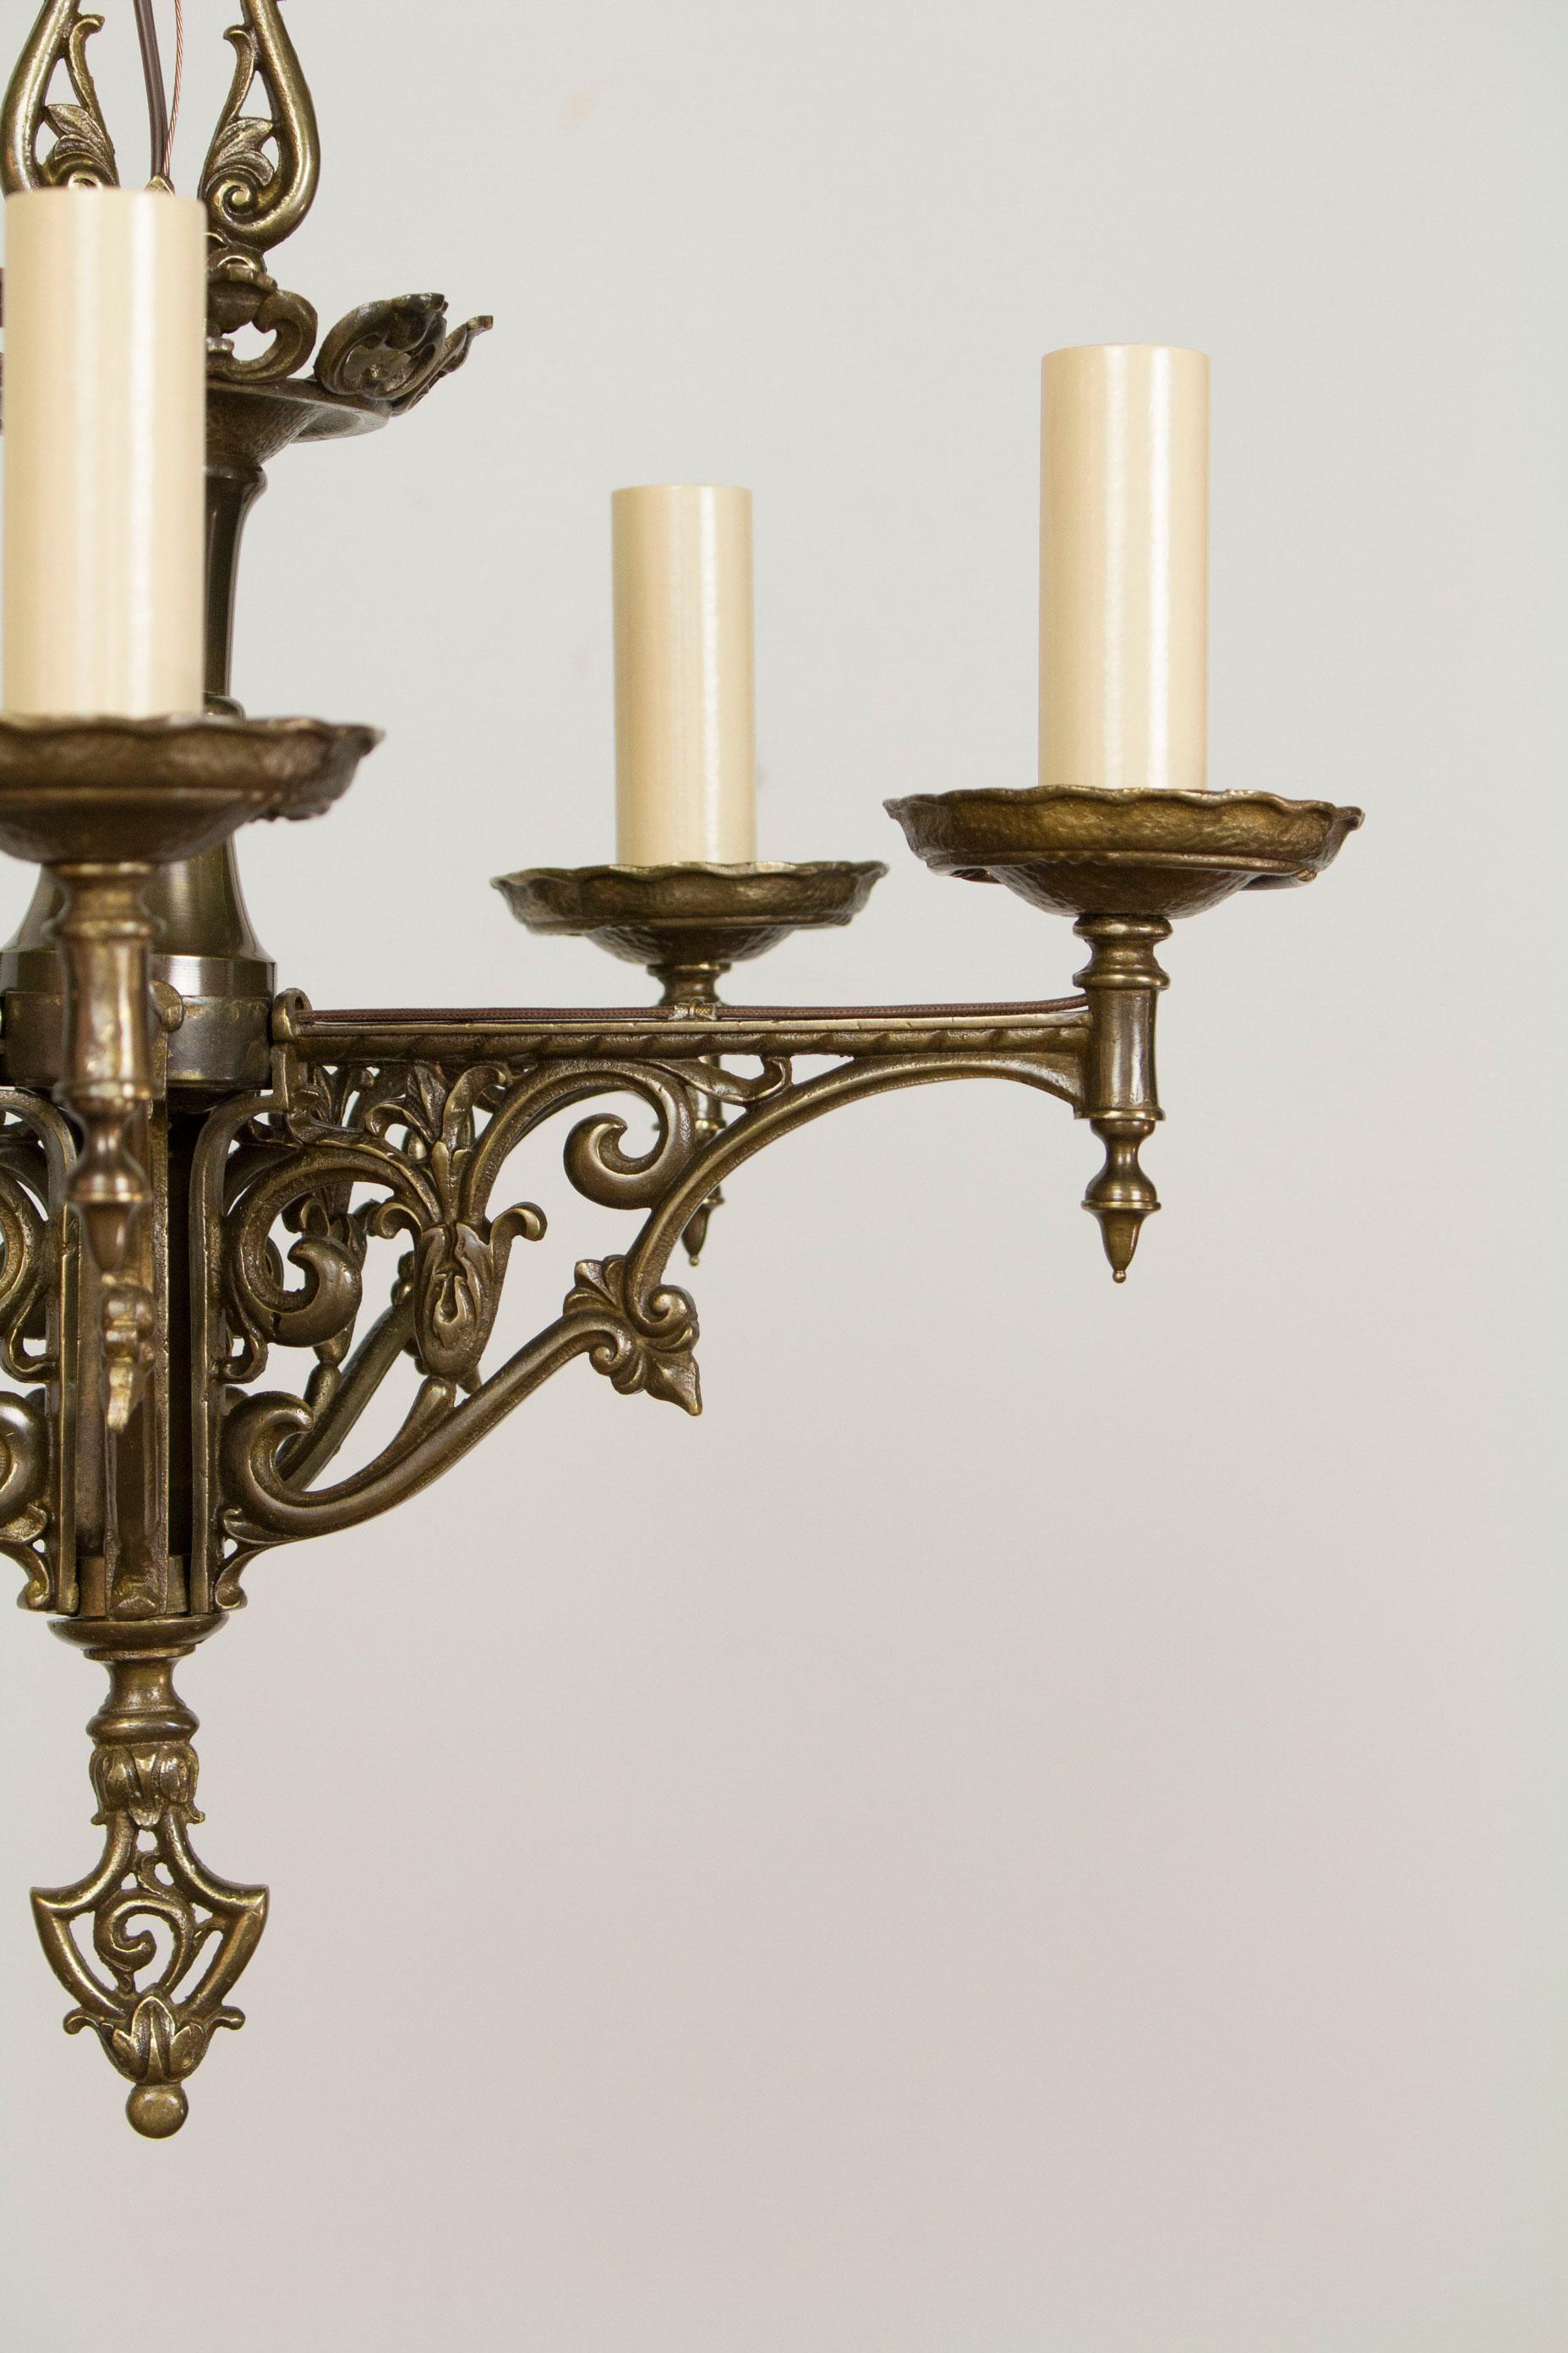 Five Light Tudor Chandelier. Solid Brass with a dark patina finish. Completely Restored and Rewired,  ready to hang. Revival Style, American, C. 1930

Matching Three Arm Tudor Chandelier  is available as well, C349.  

Dimensions: Diameter: 19